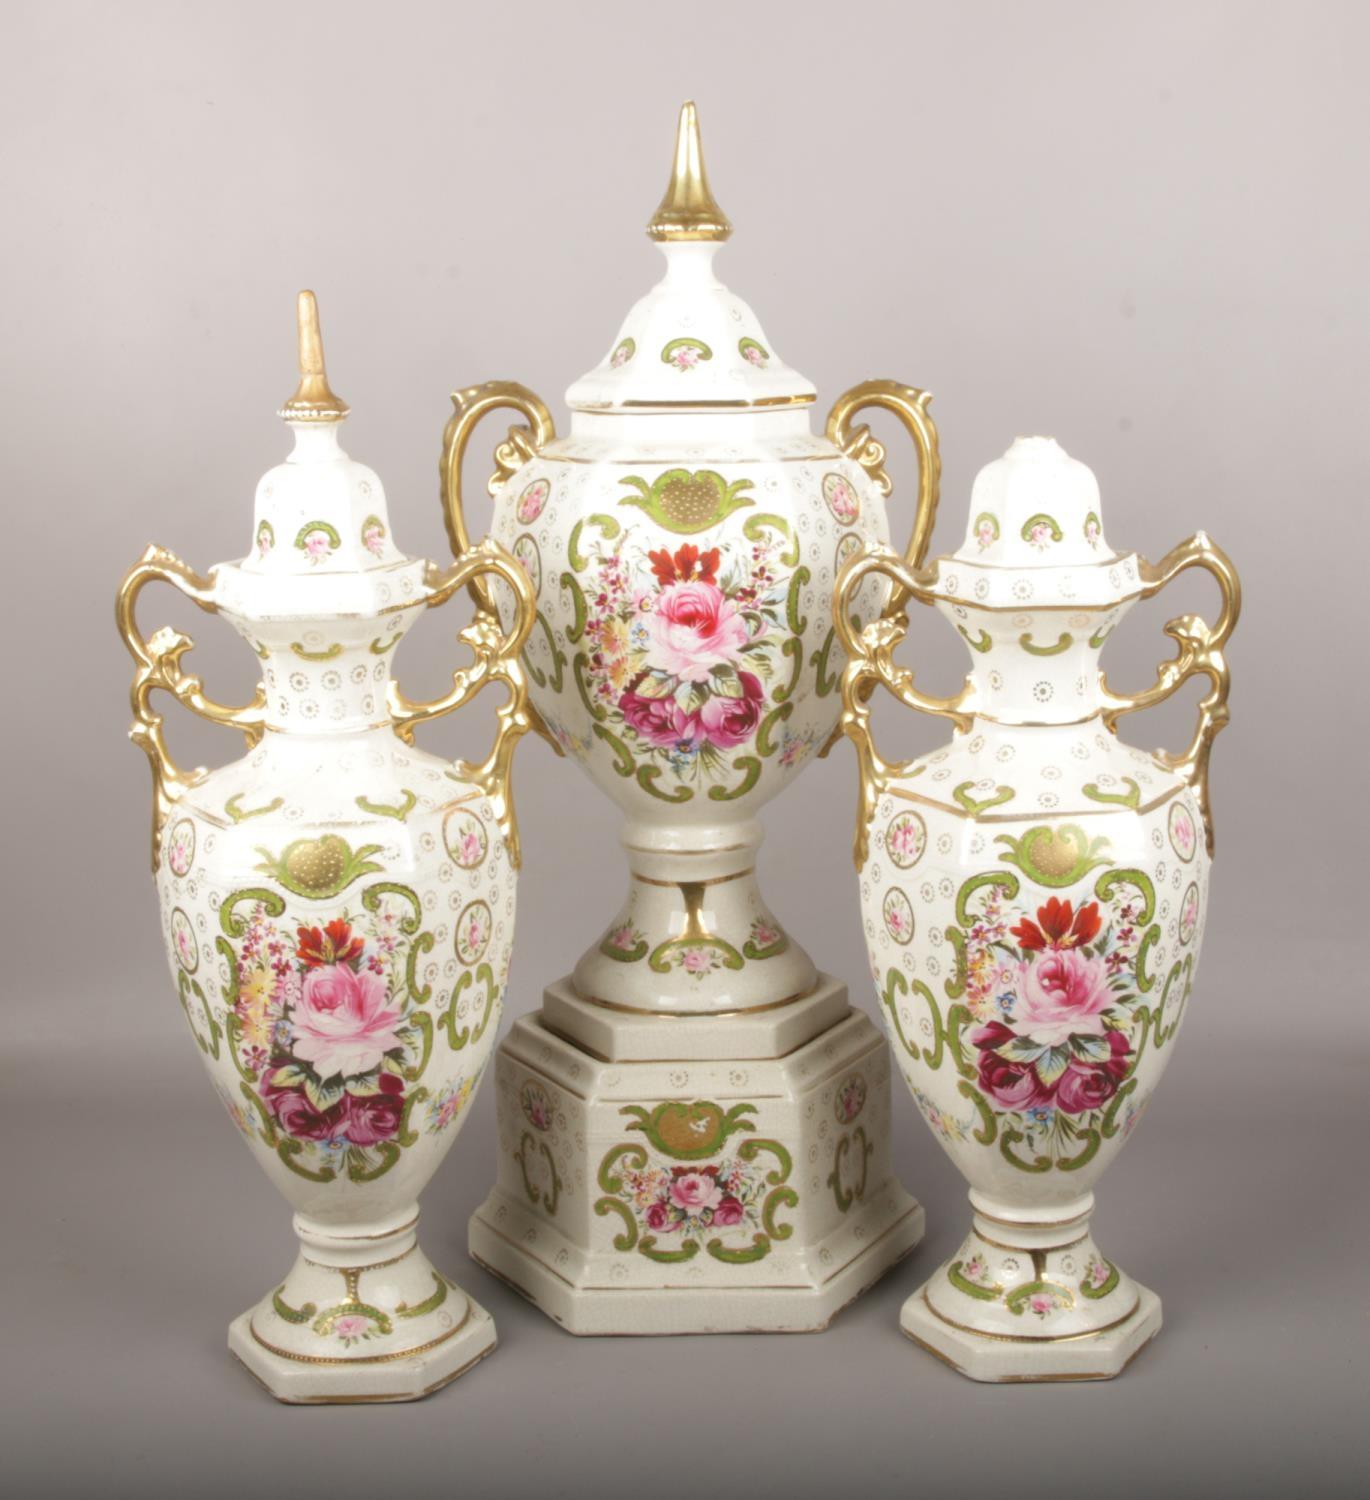 A pottery garniture, with gilt and floral decoration. Two finials repaired. Crack to lid. One finial